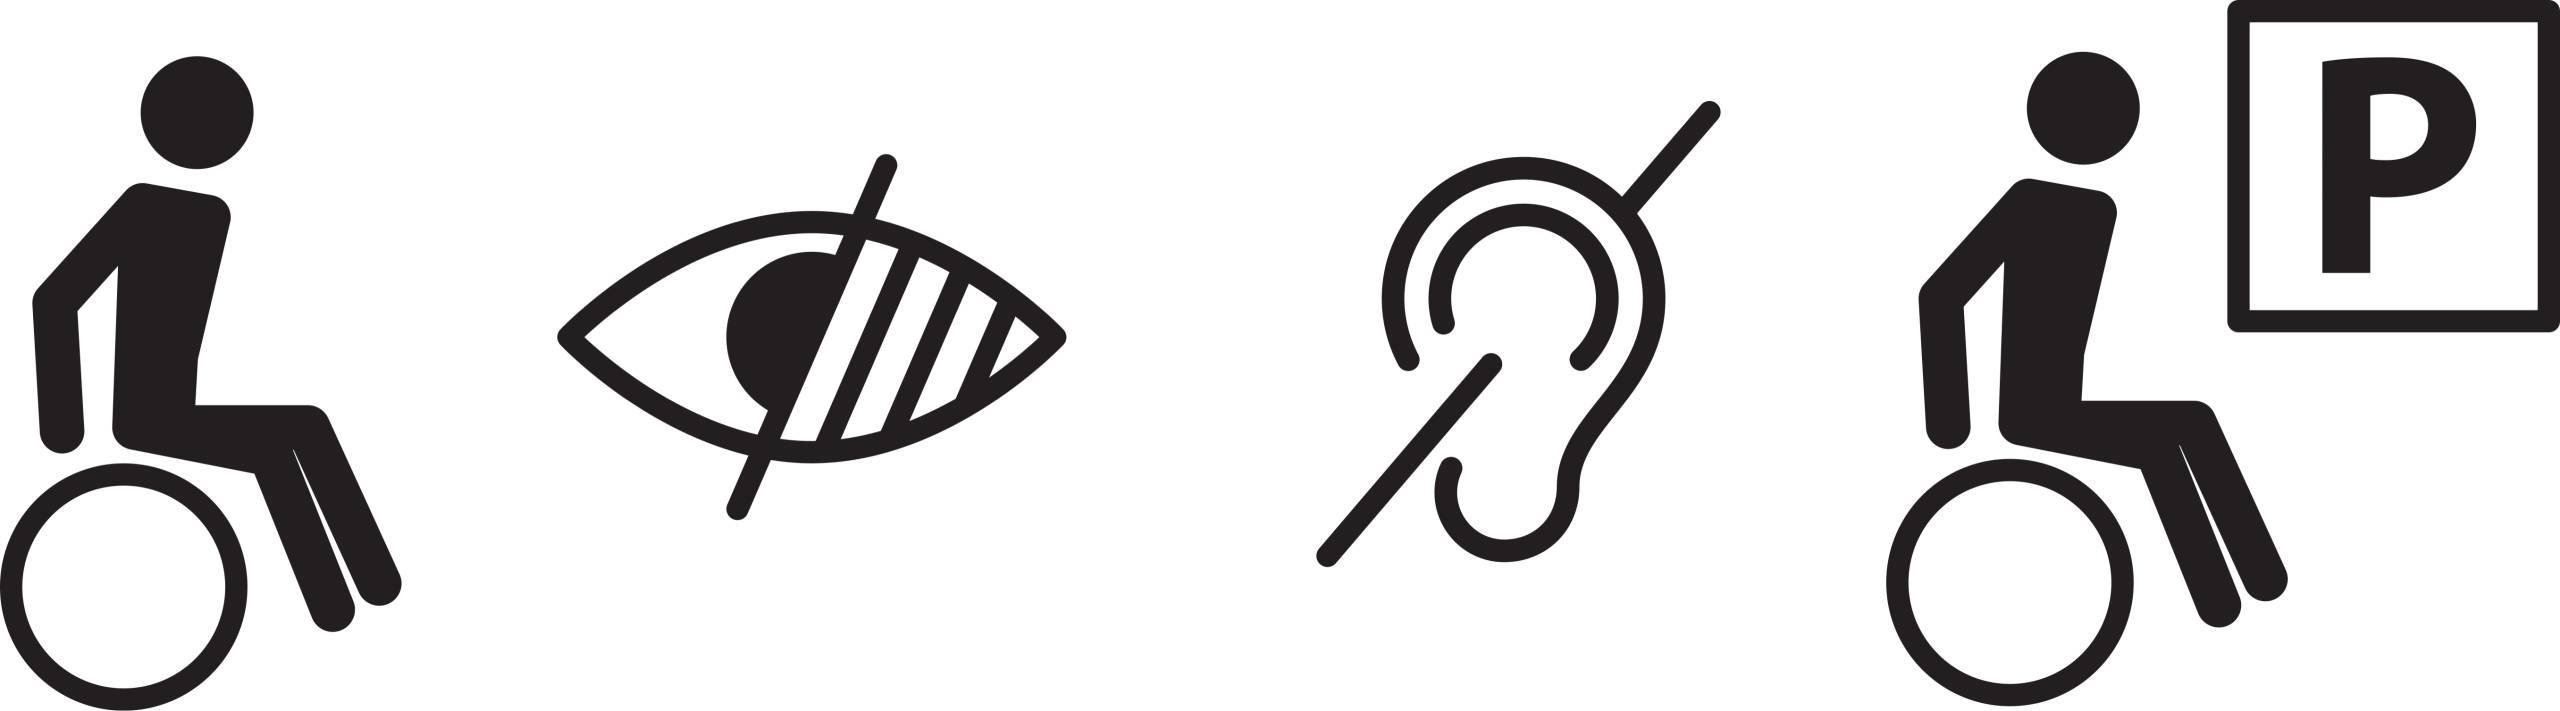 Multiple images in black, from left to right, a person in a wheelchair, an eye with half of it blanked out, an ear with a diagonal line through it, a person in a wheelchair with the letter 'P' in a black box on the right